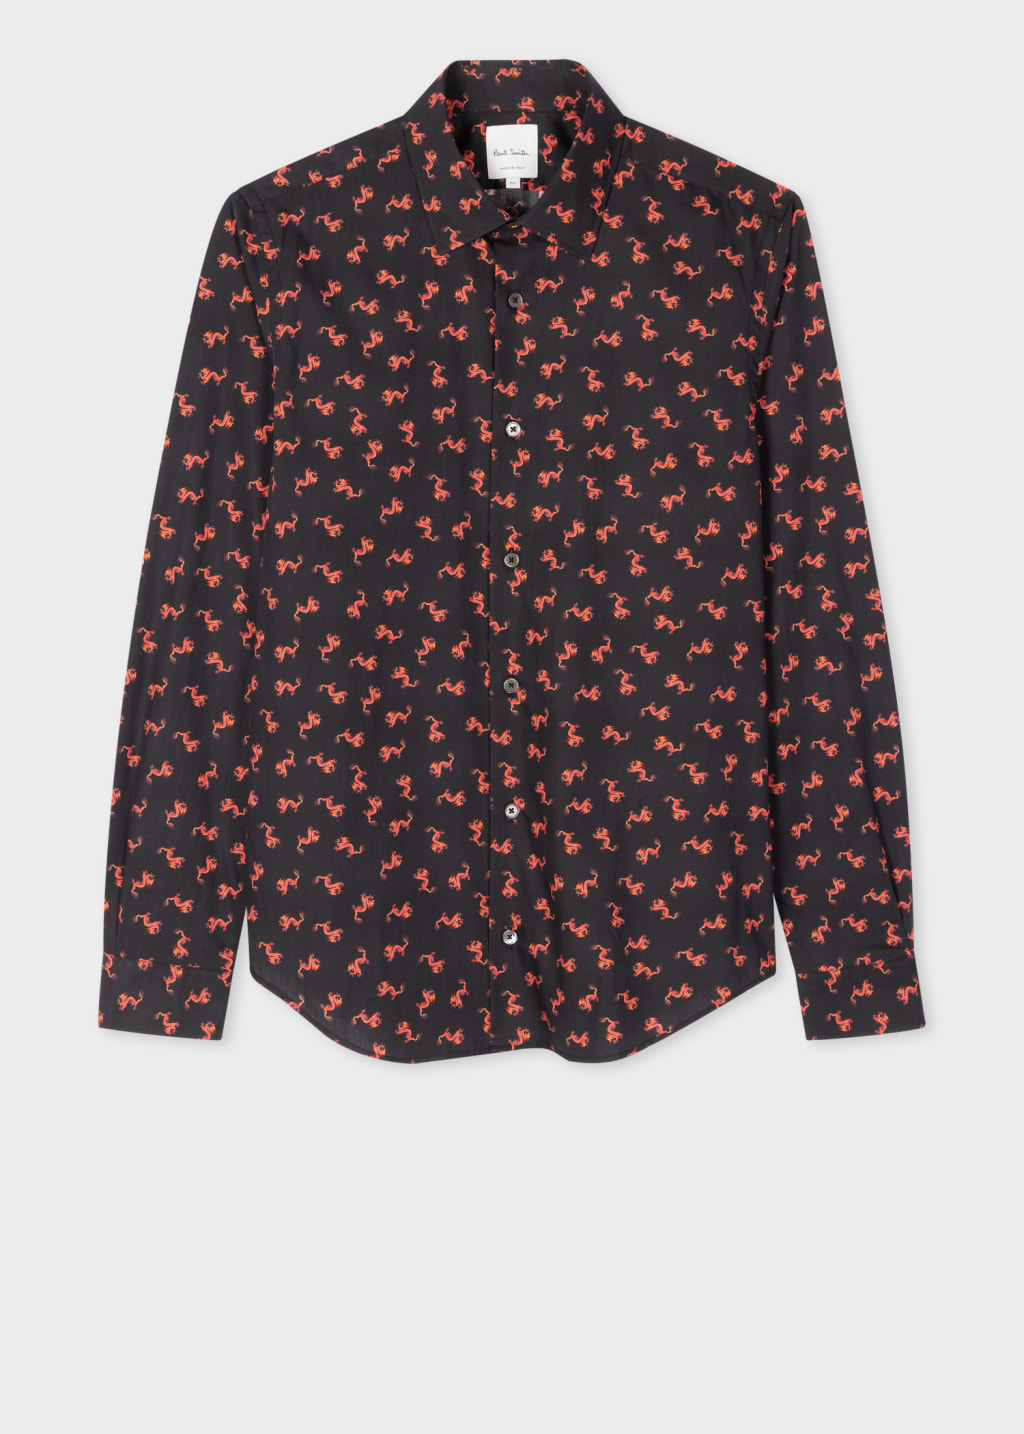 Front View - Super Slim-Fit Black 'Year Of The Dragon' Shirt Paul Smith